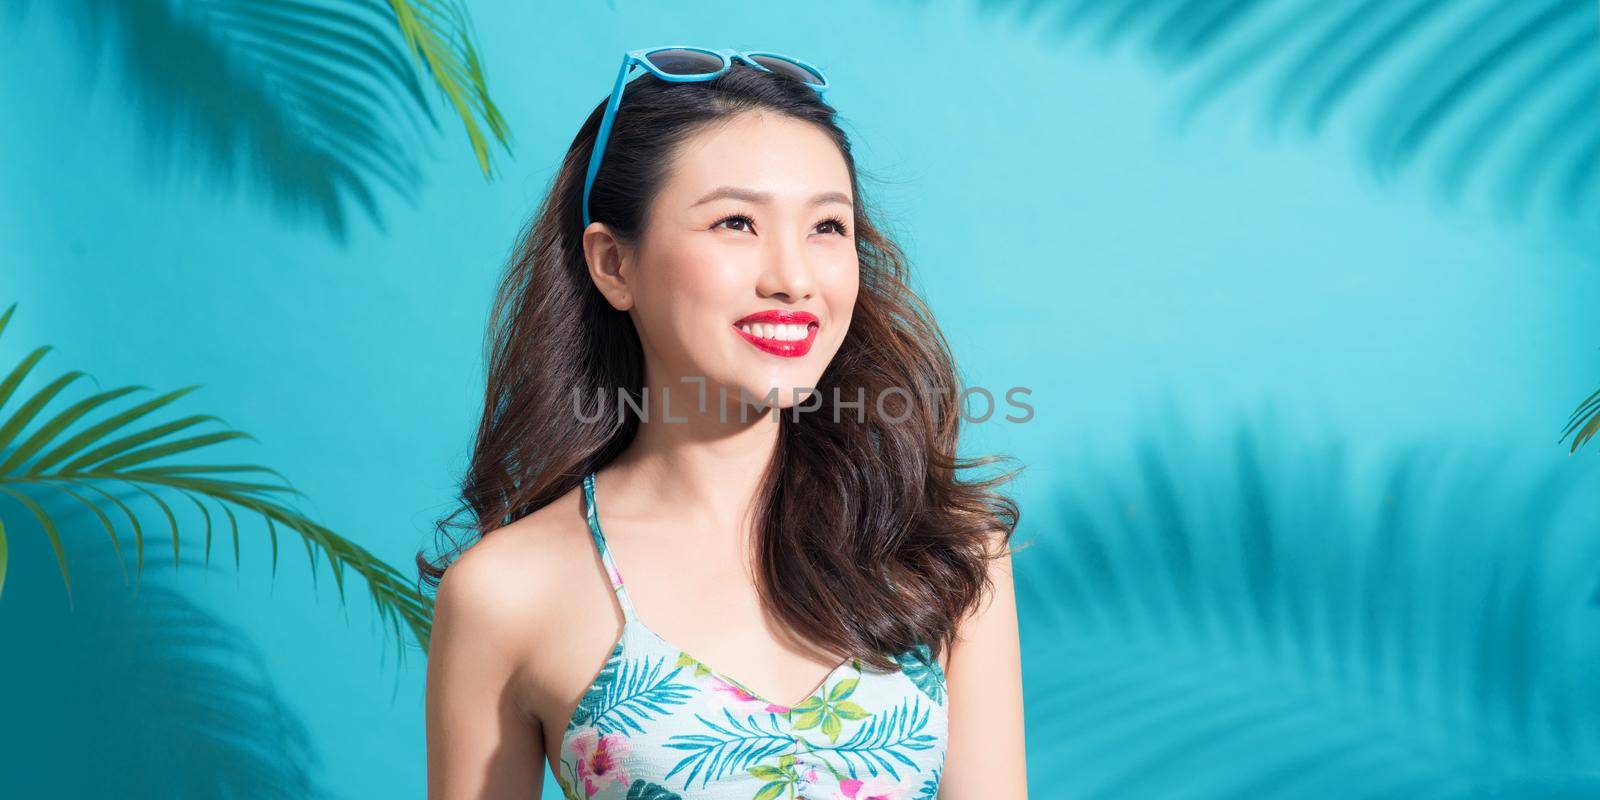 Banner size. Summer fashion girl standing and smiling over vibrant blue background